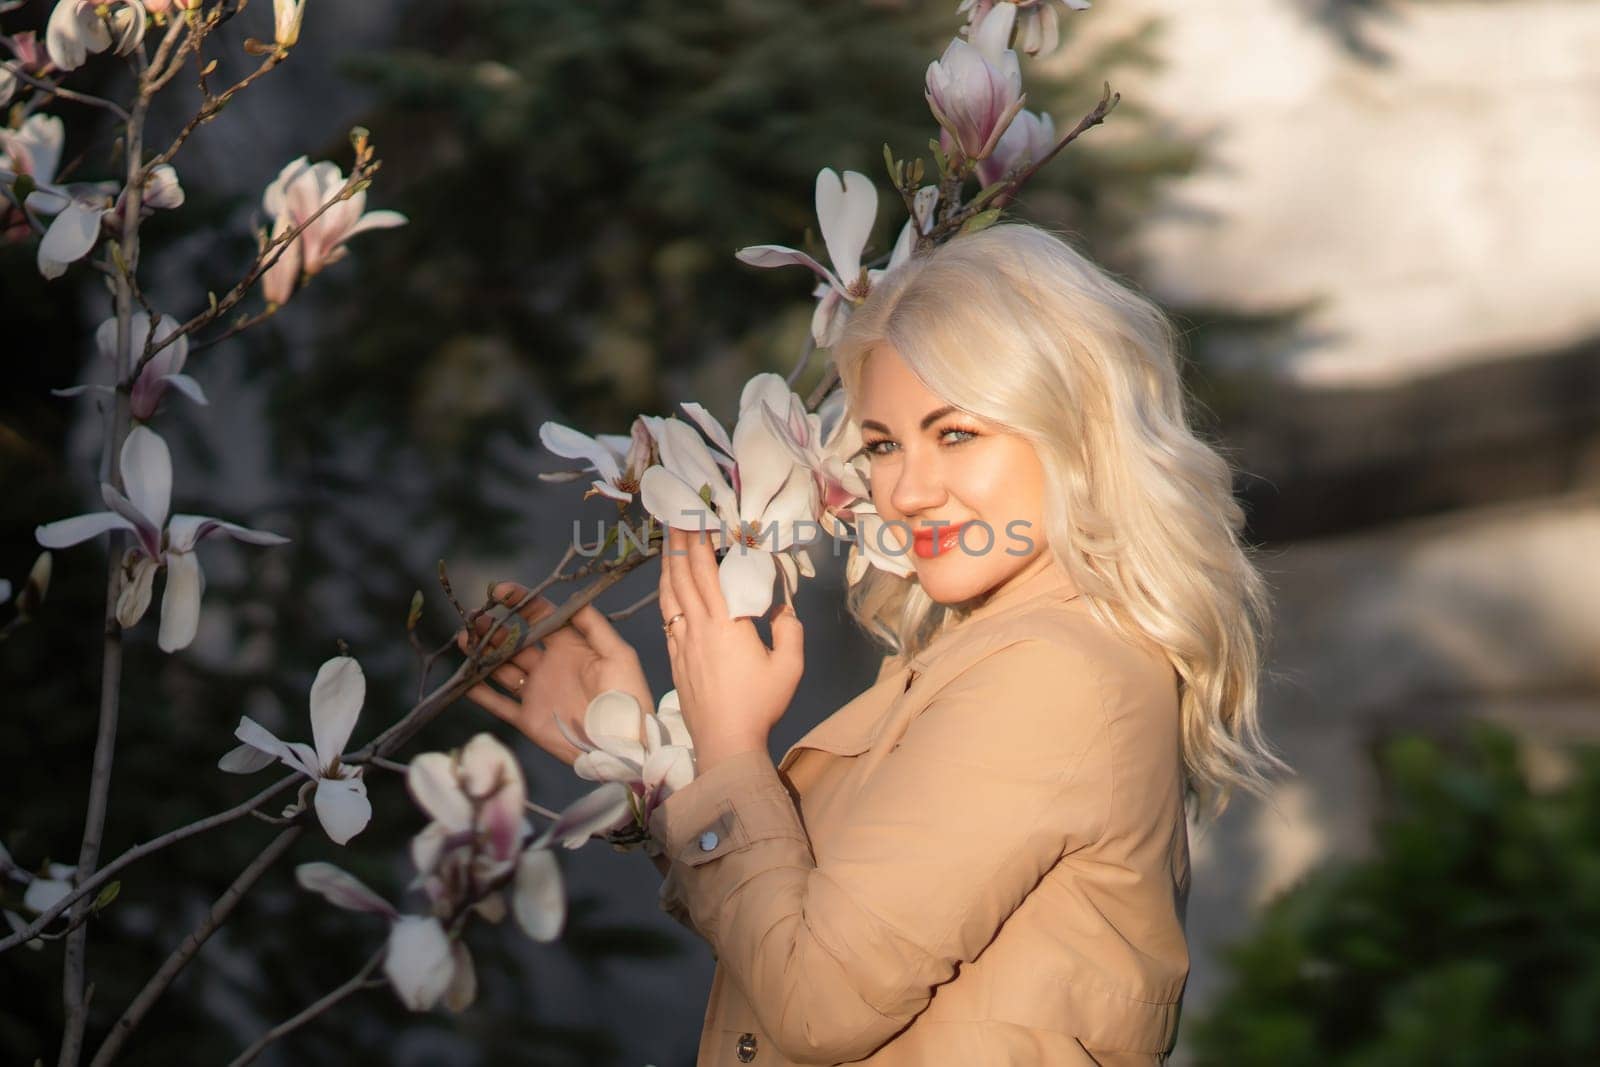 A woman is holding a magnolia flower in her hand and standing in front of a tree. Concept of serenity and beauty, as the woman is surrounded by nature and the flower adds a touch of color